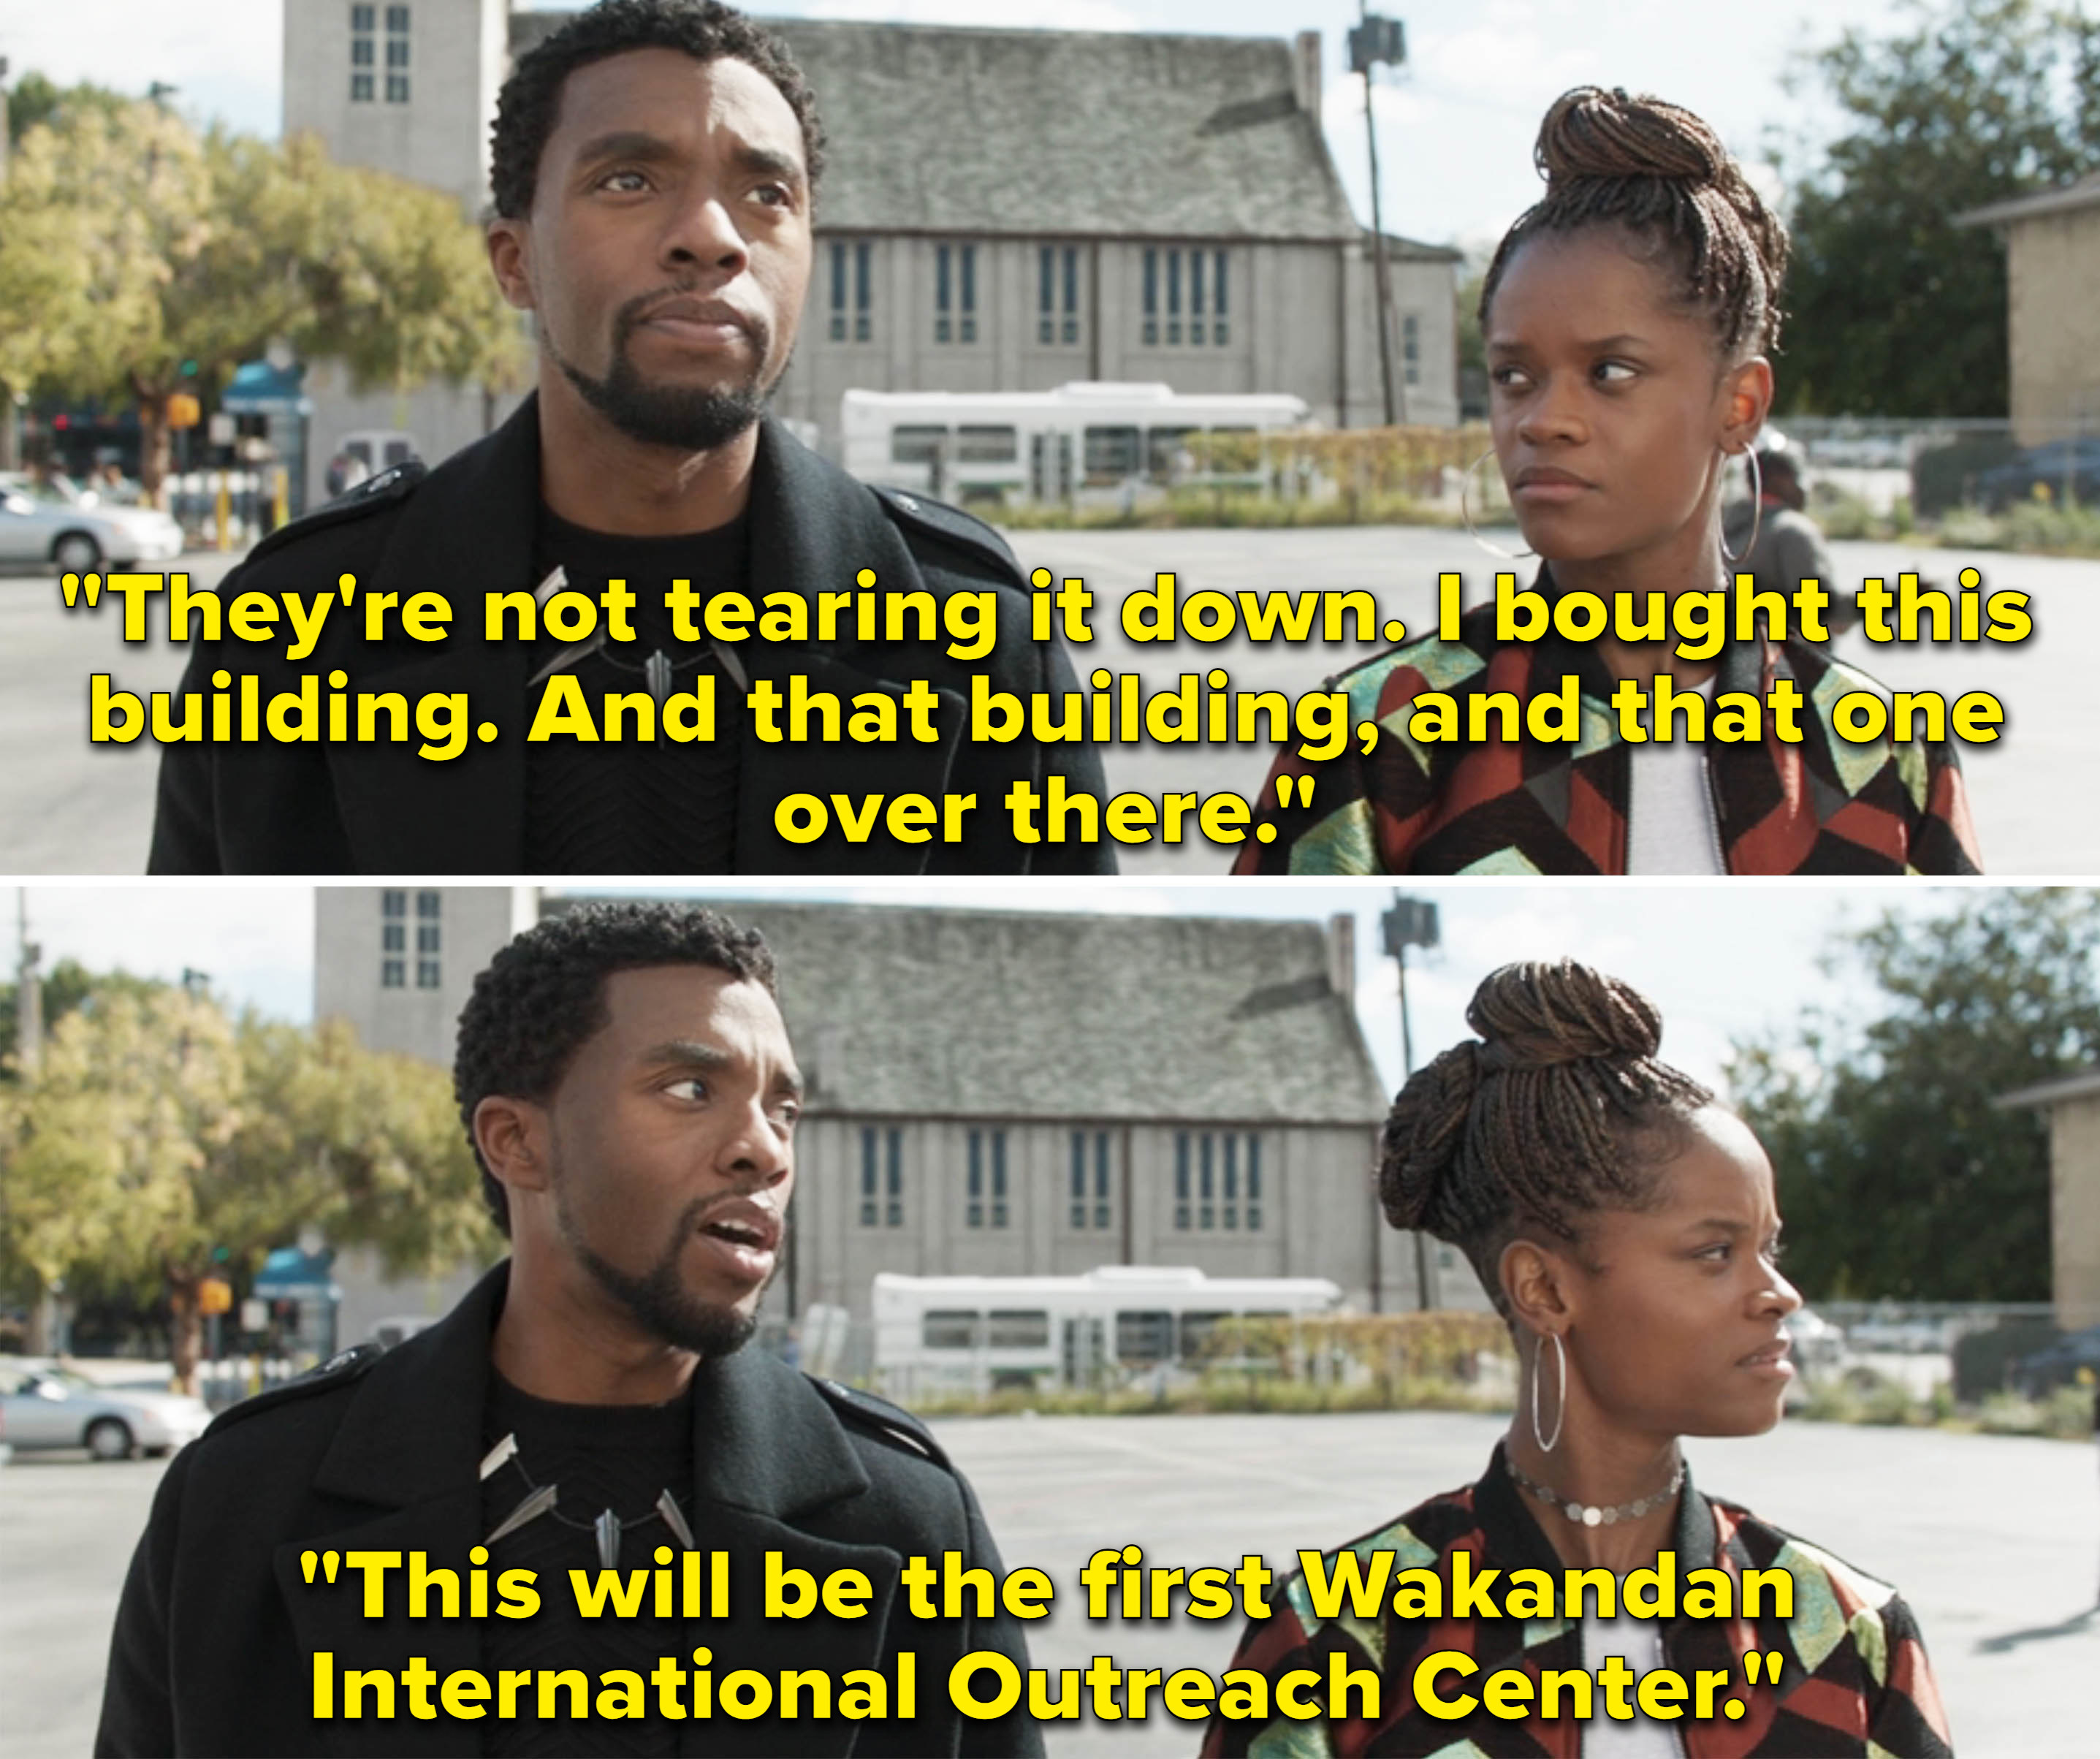 T&#x27;Challa poinsting out to Shuri the buildings he bought in Oakland to be the first Wakandan International Outreach Center